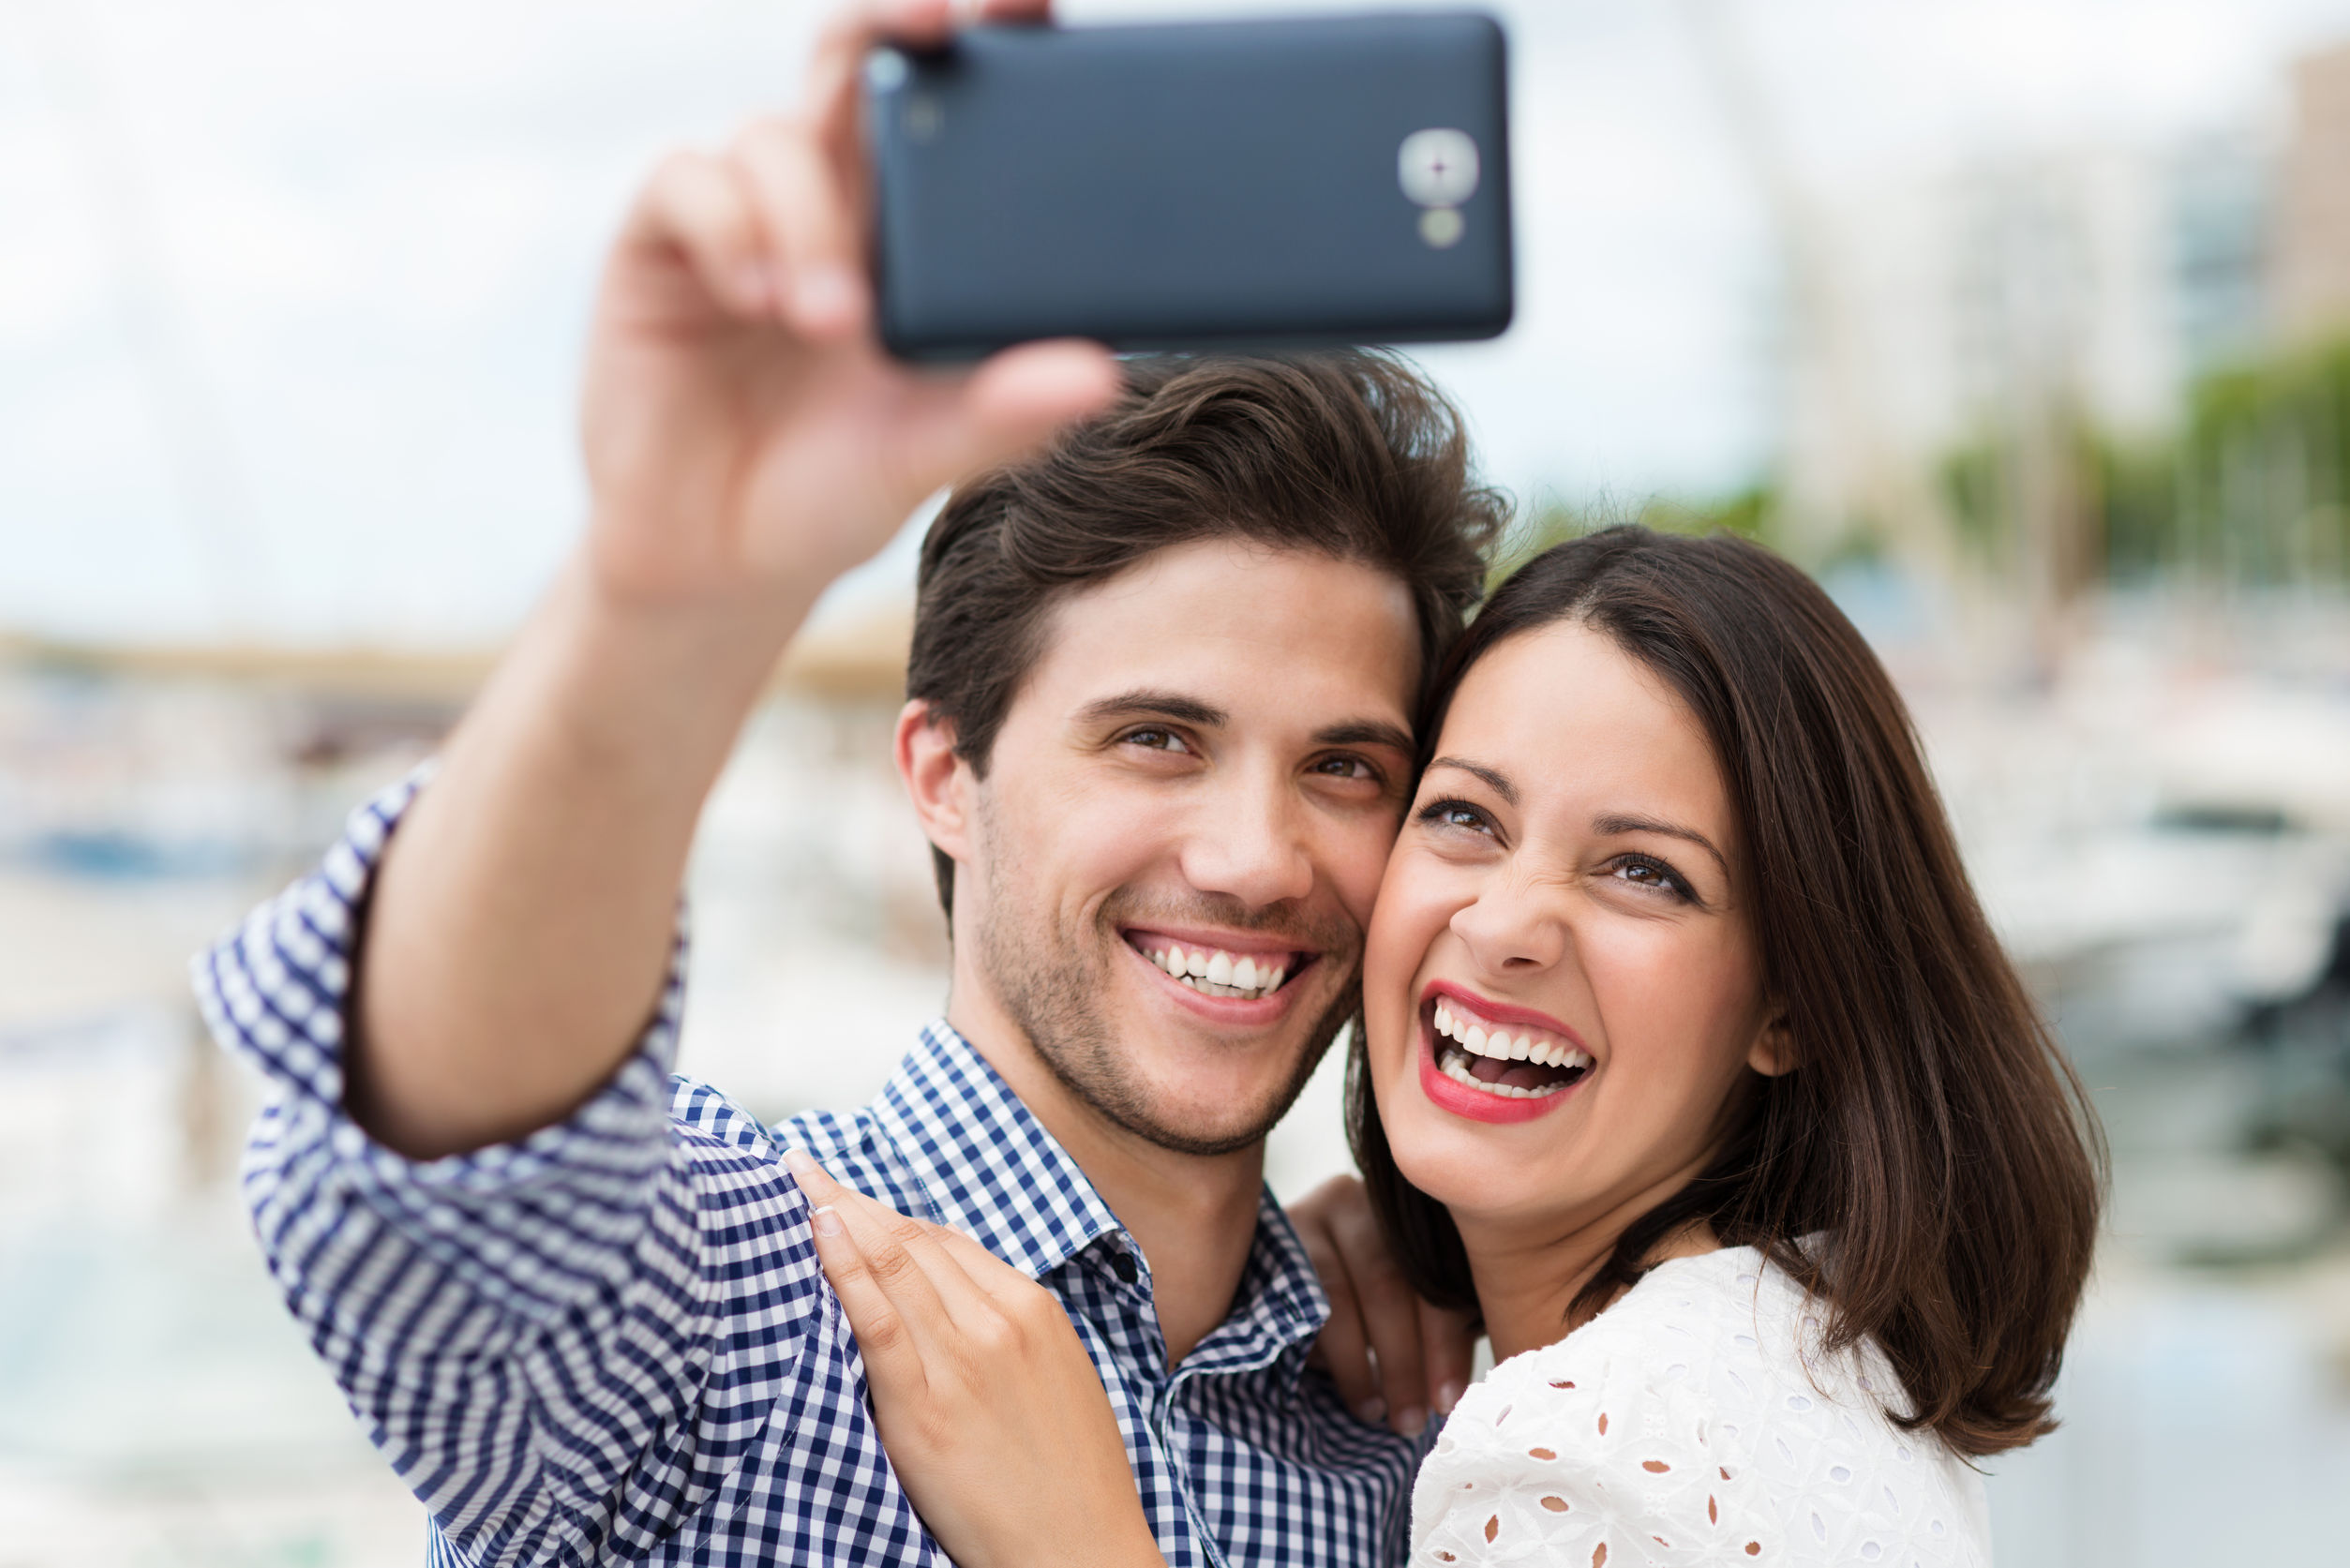 Image of couple taking selfie-WY298490-Picxy